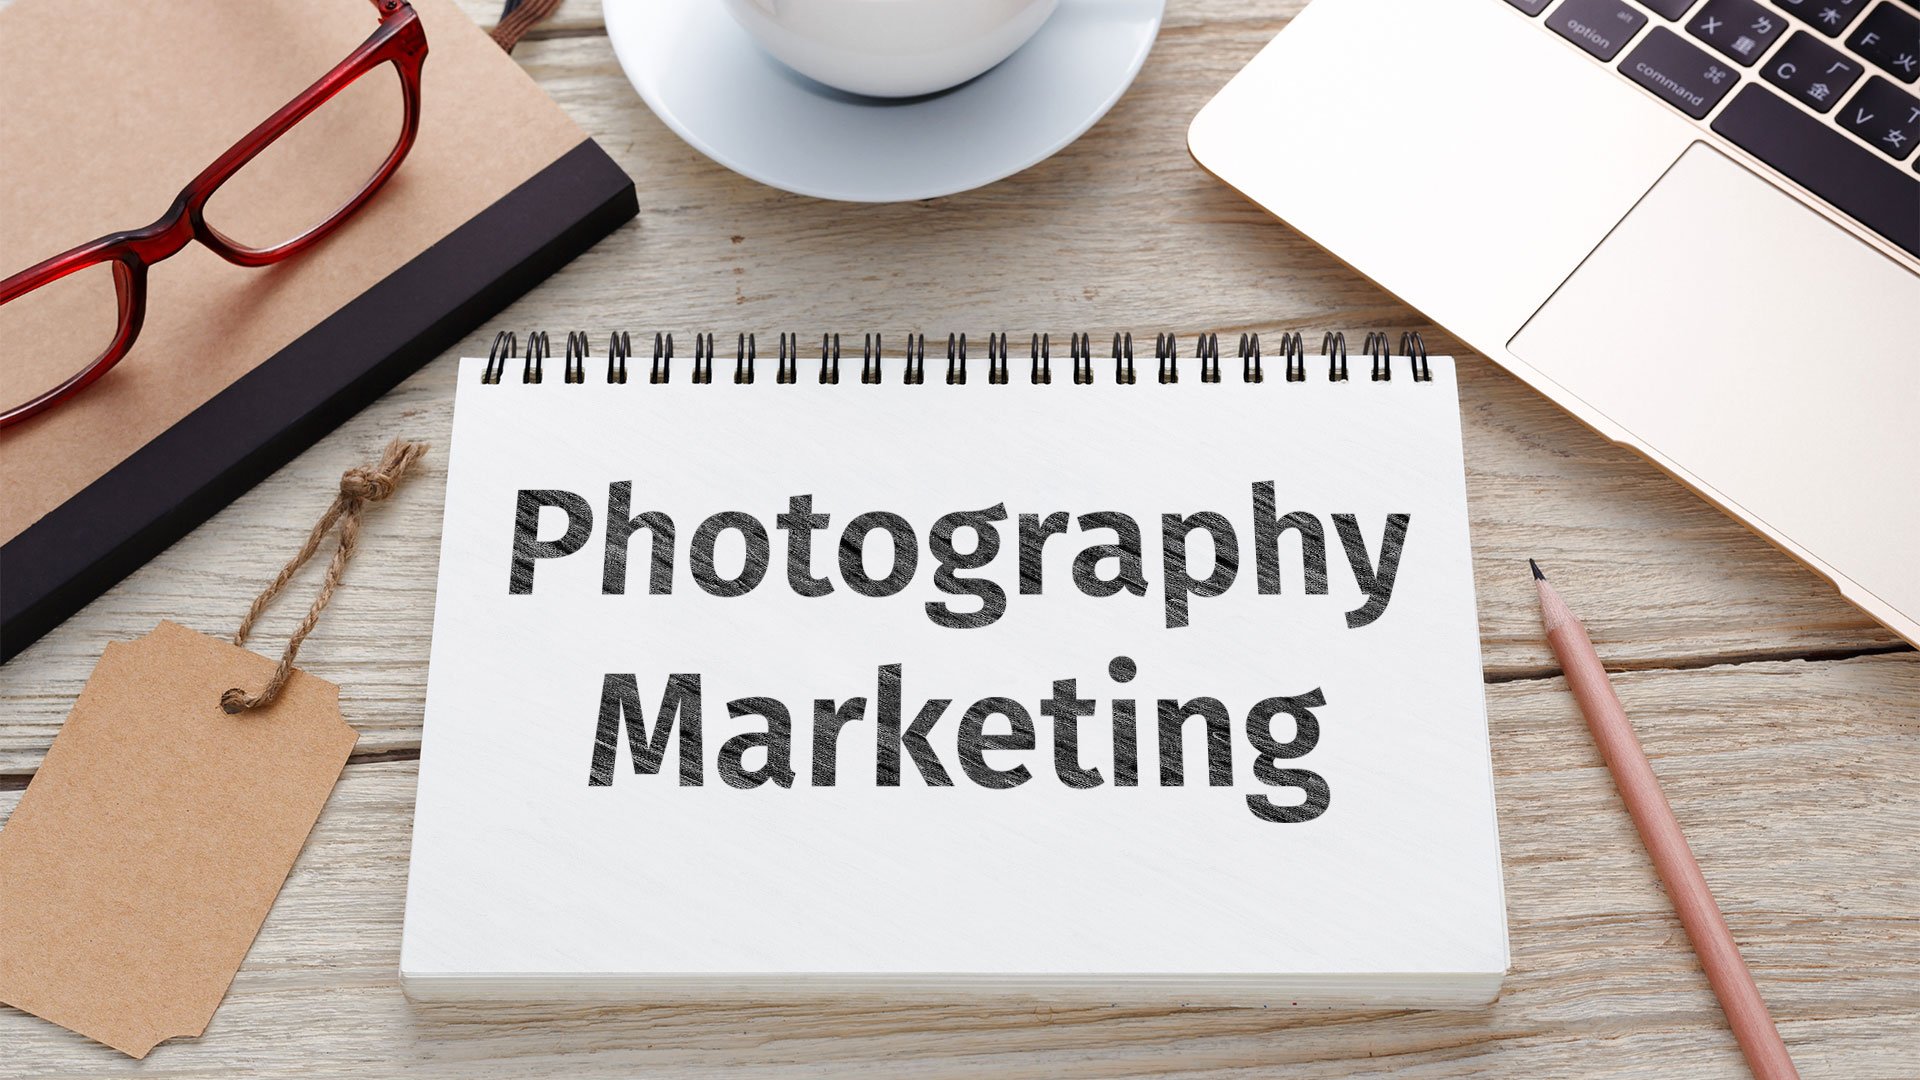 Photography Marketing: Making Connections at Photography Conferences